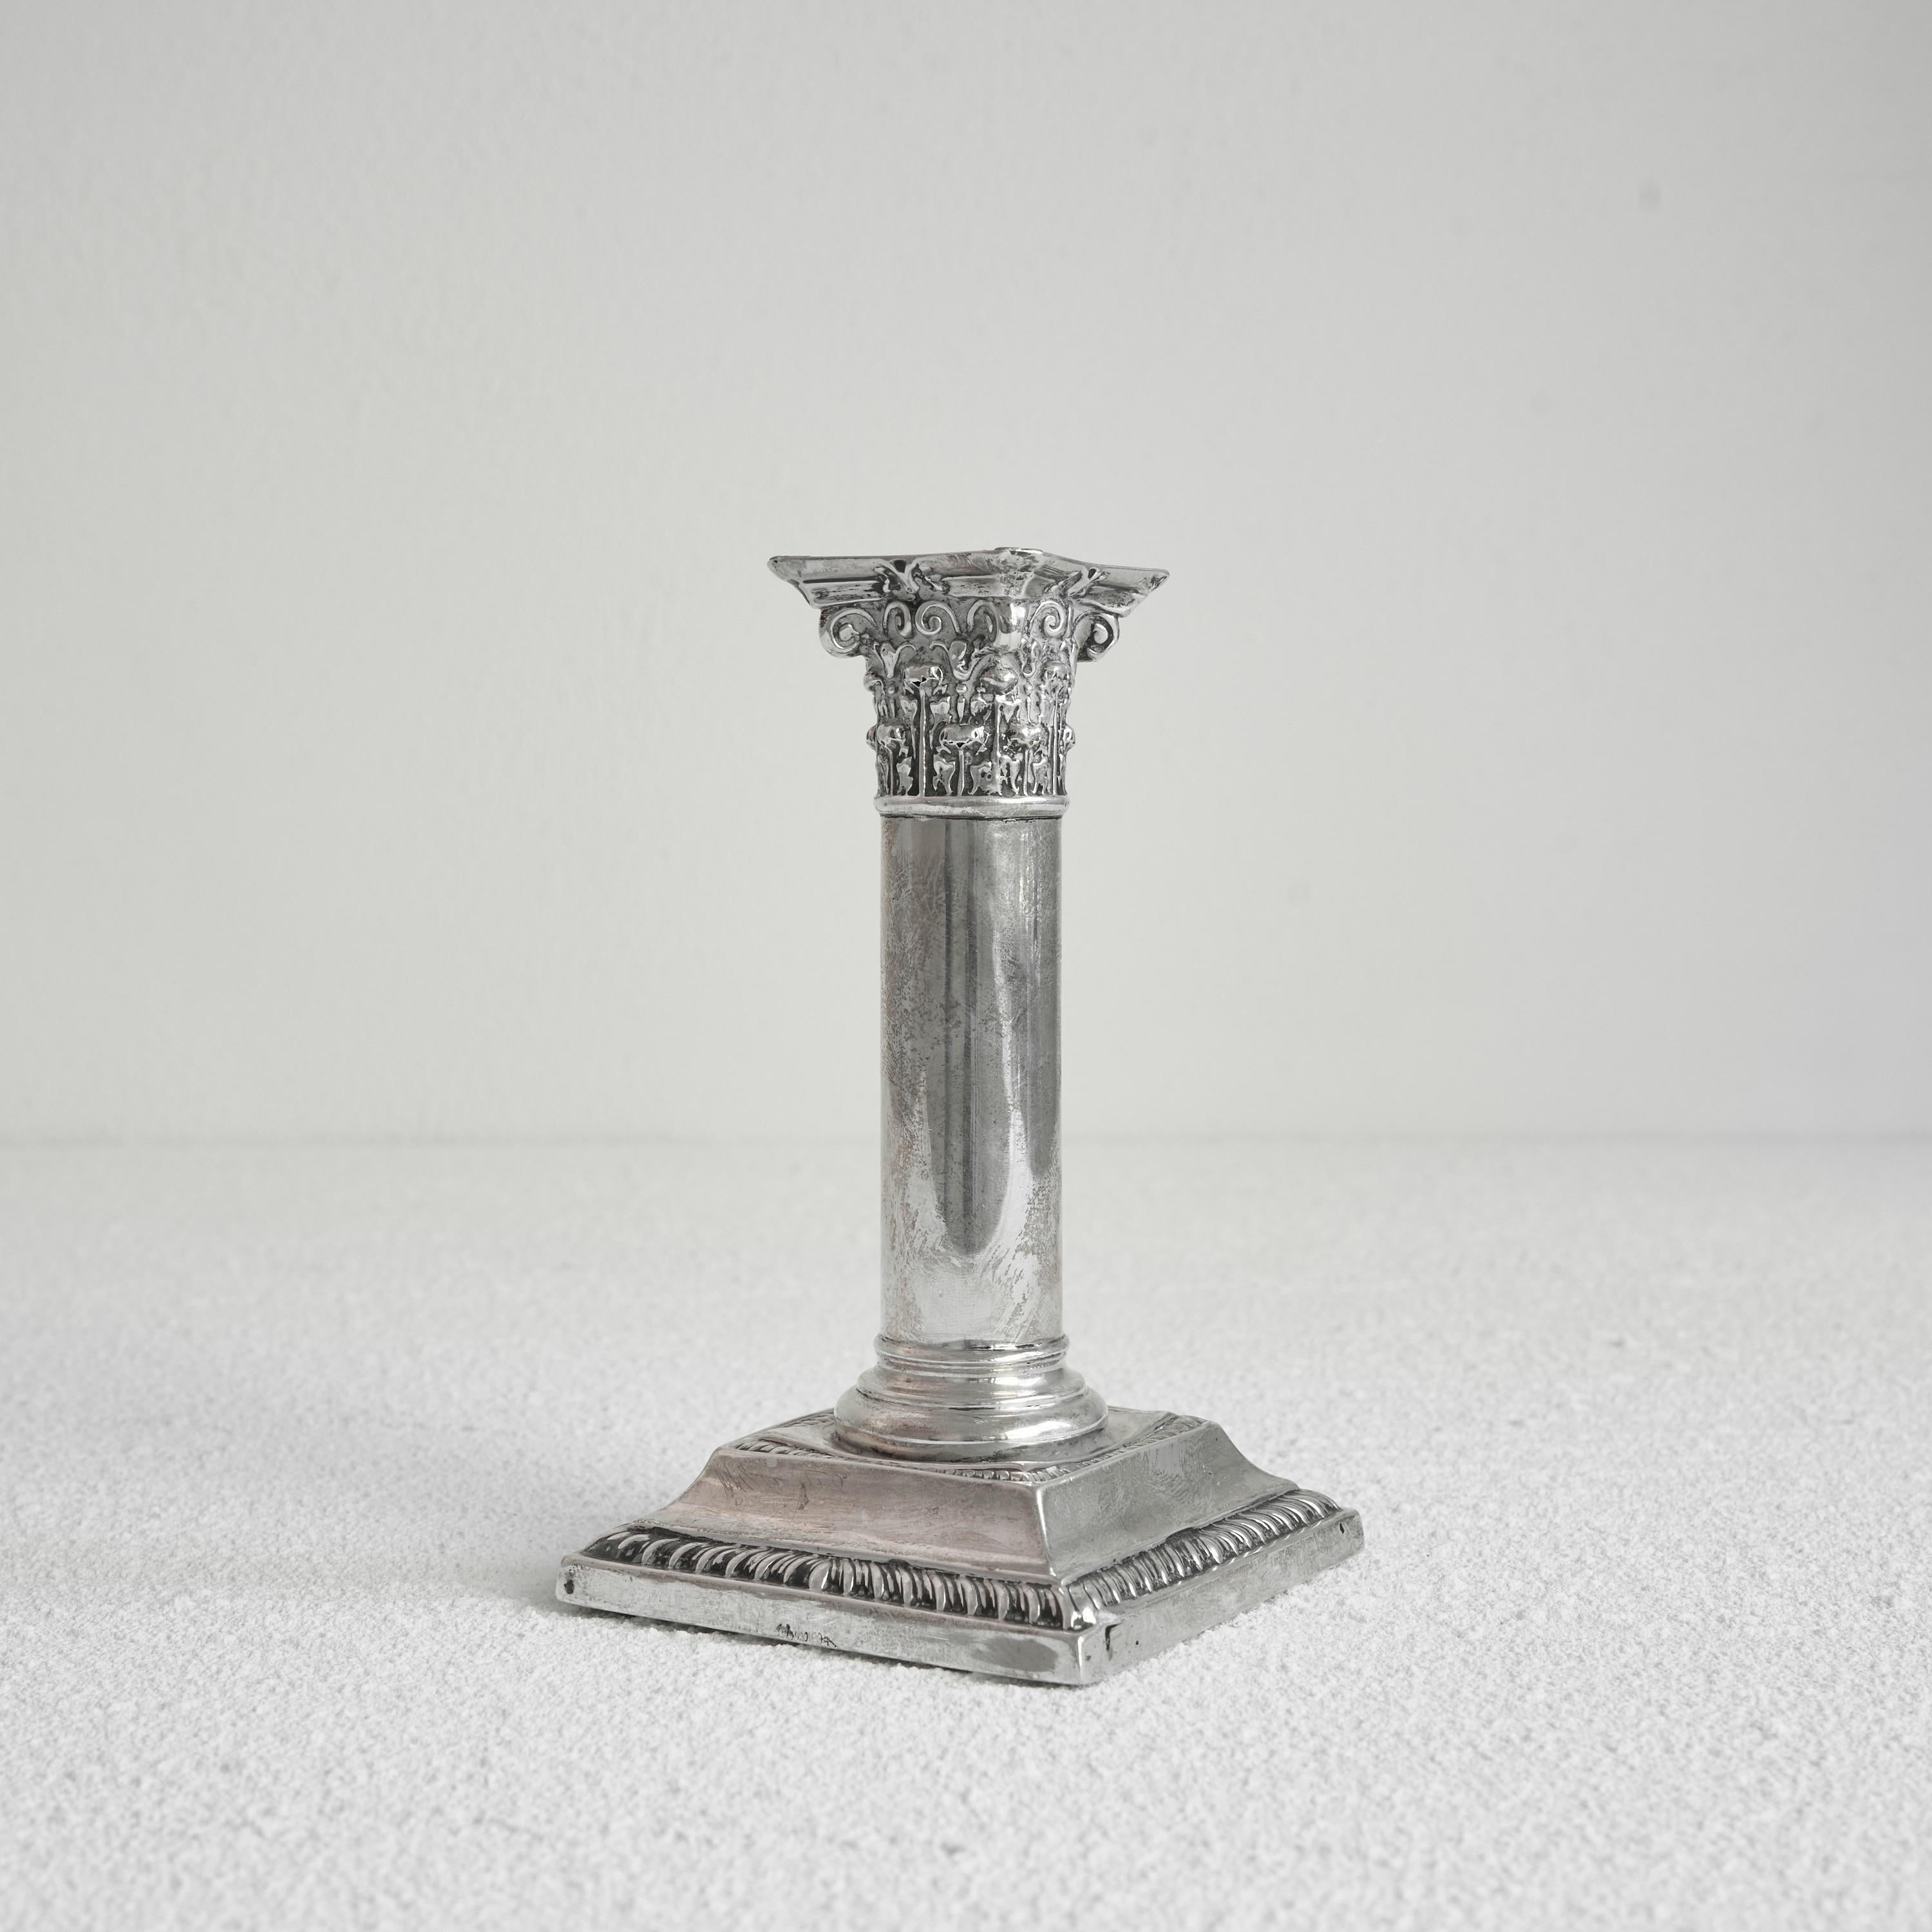 Corinthian column candle holder in solid silver

Wonderful and highly detailed column candle holder in heavy silver. 

Great piece with a beautiful classical appearance. Corinthian column shape. 

A nice and elegant piece on your breakfast or